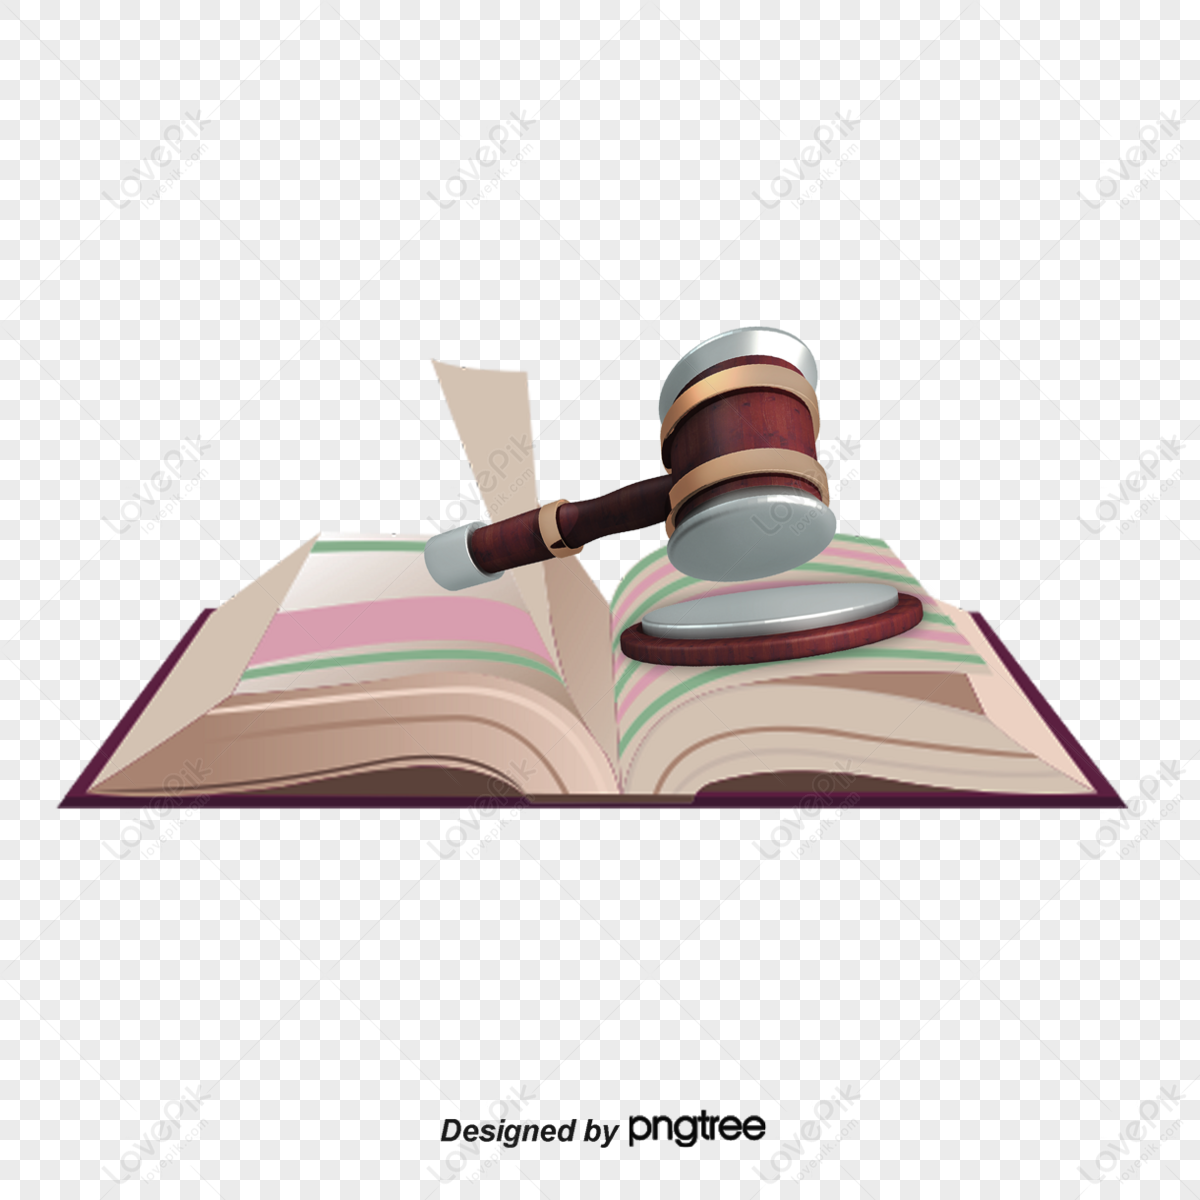 hammer and law books promotional material,propaganda,promoting law png transparent background